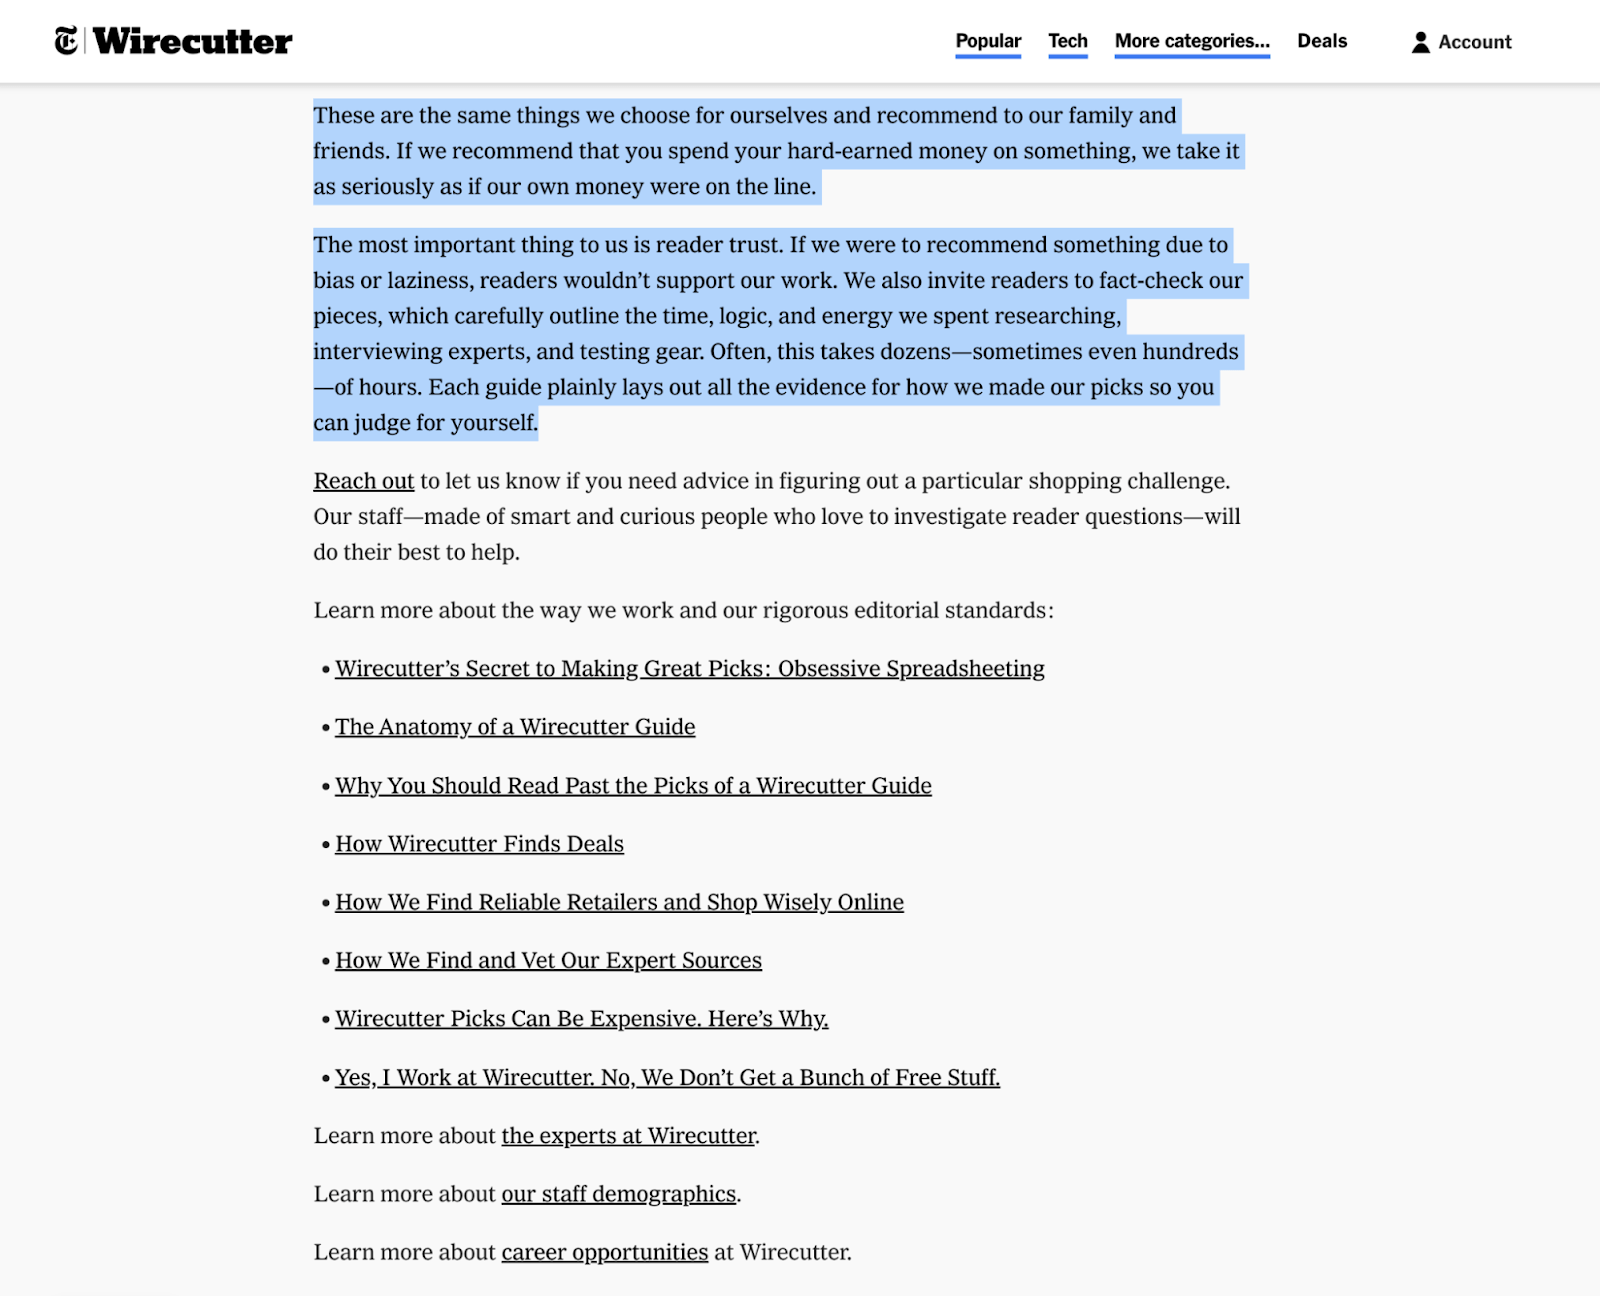 Excerpt of article stating Wirecutter staff will fact-check and consult various people and resources for all information on the site